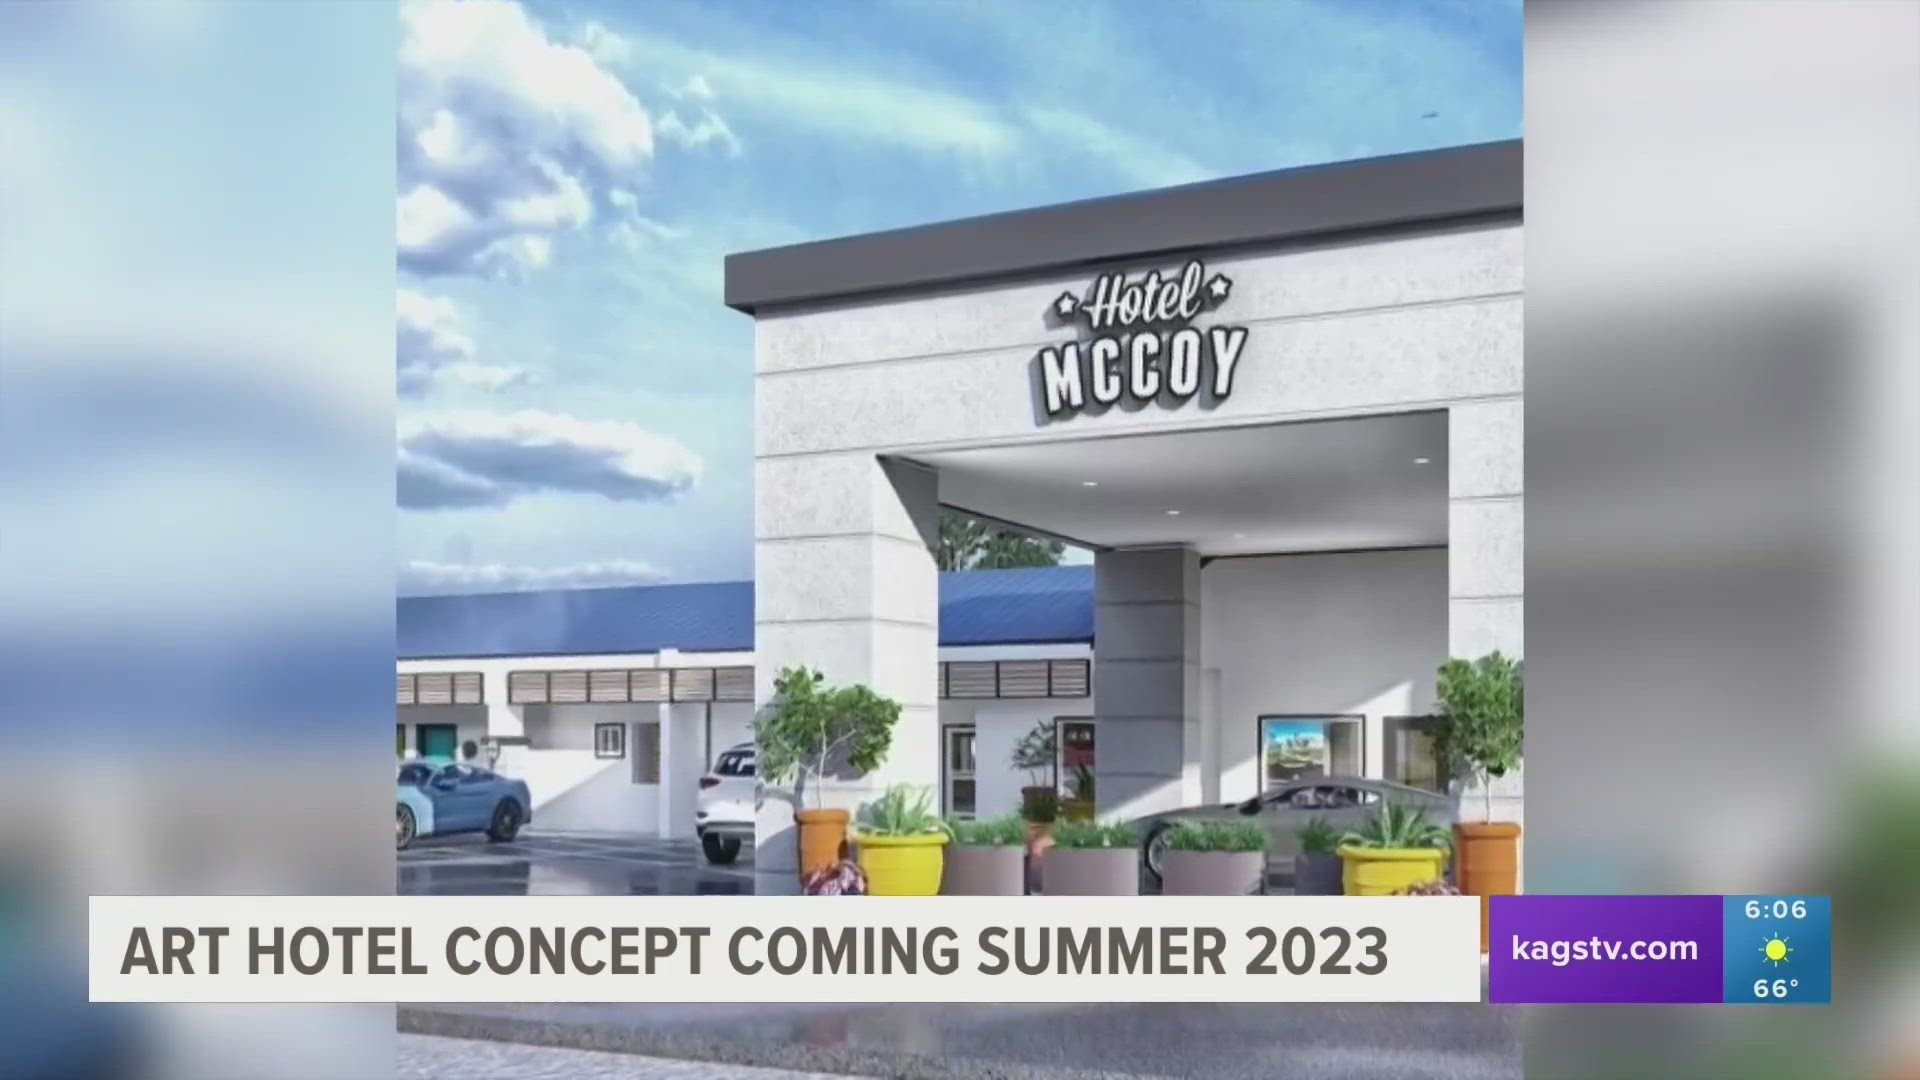 The McCoy Hotel, a new art hotel concept, is set to open its College Station location in July, and wants to highlight local local food, spirits, and art.